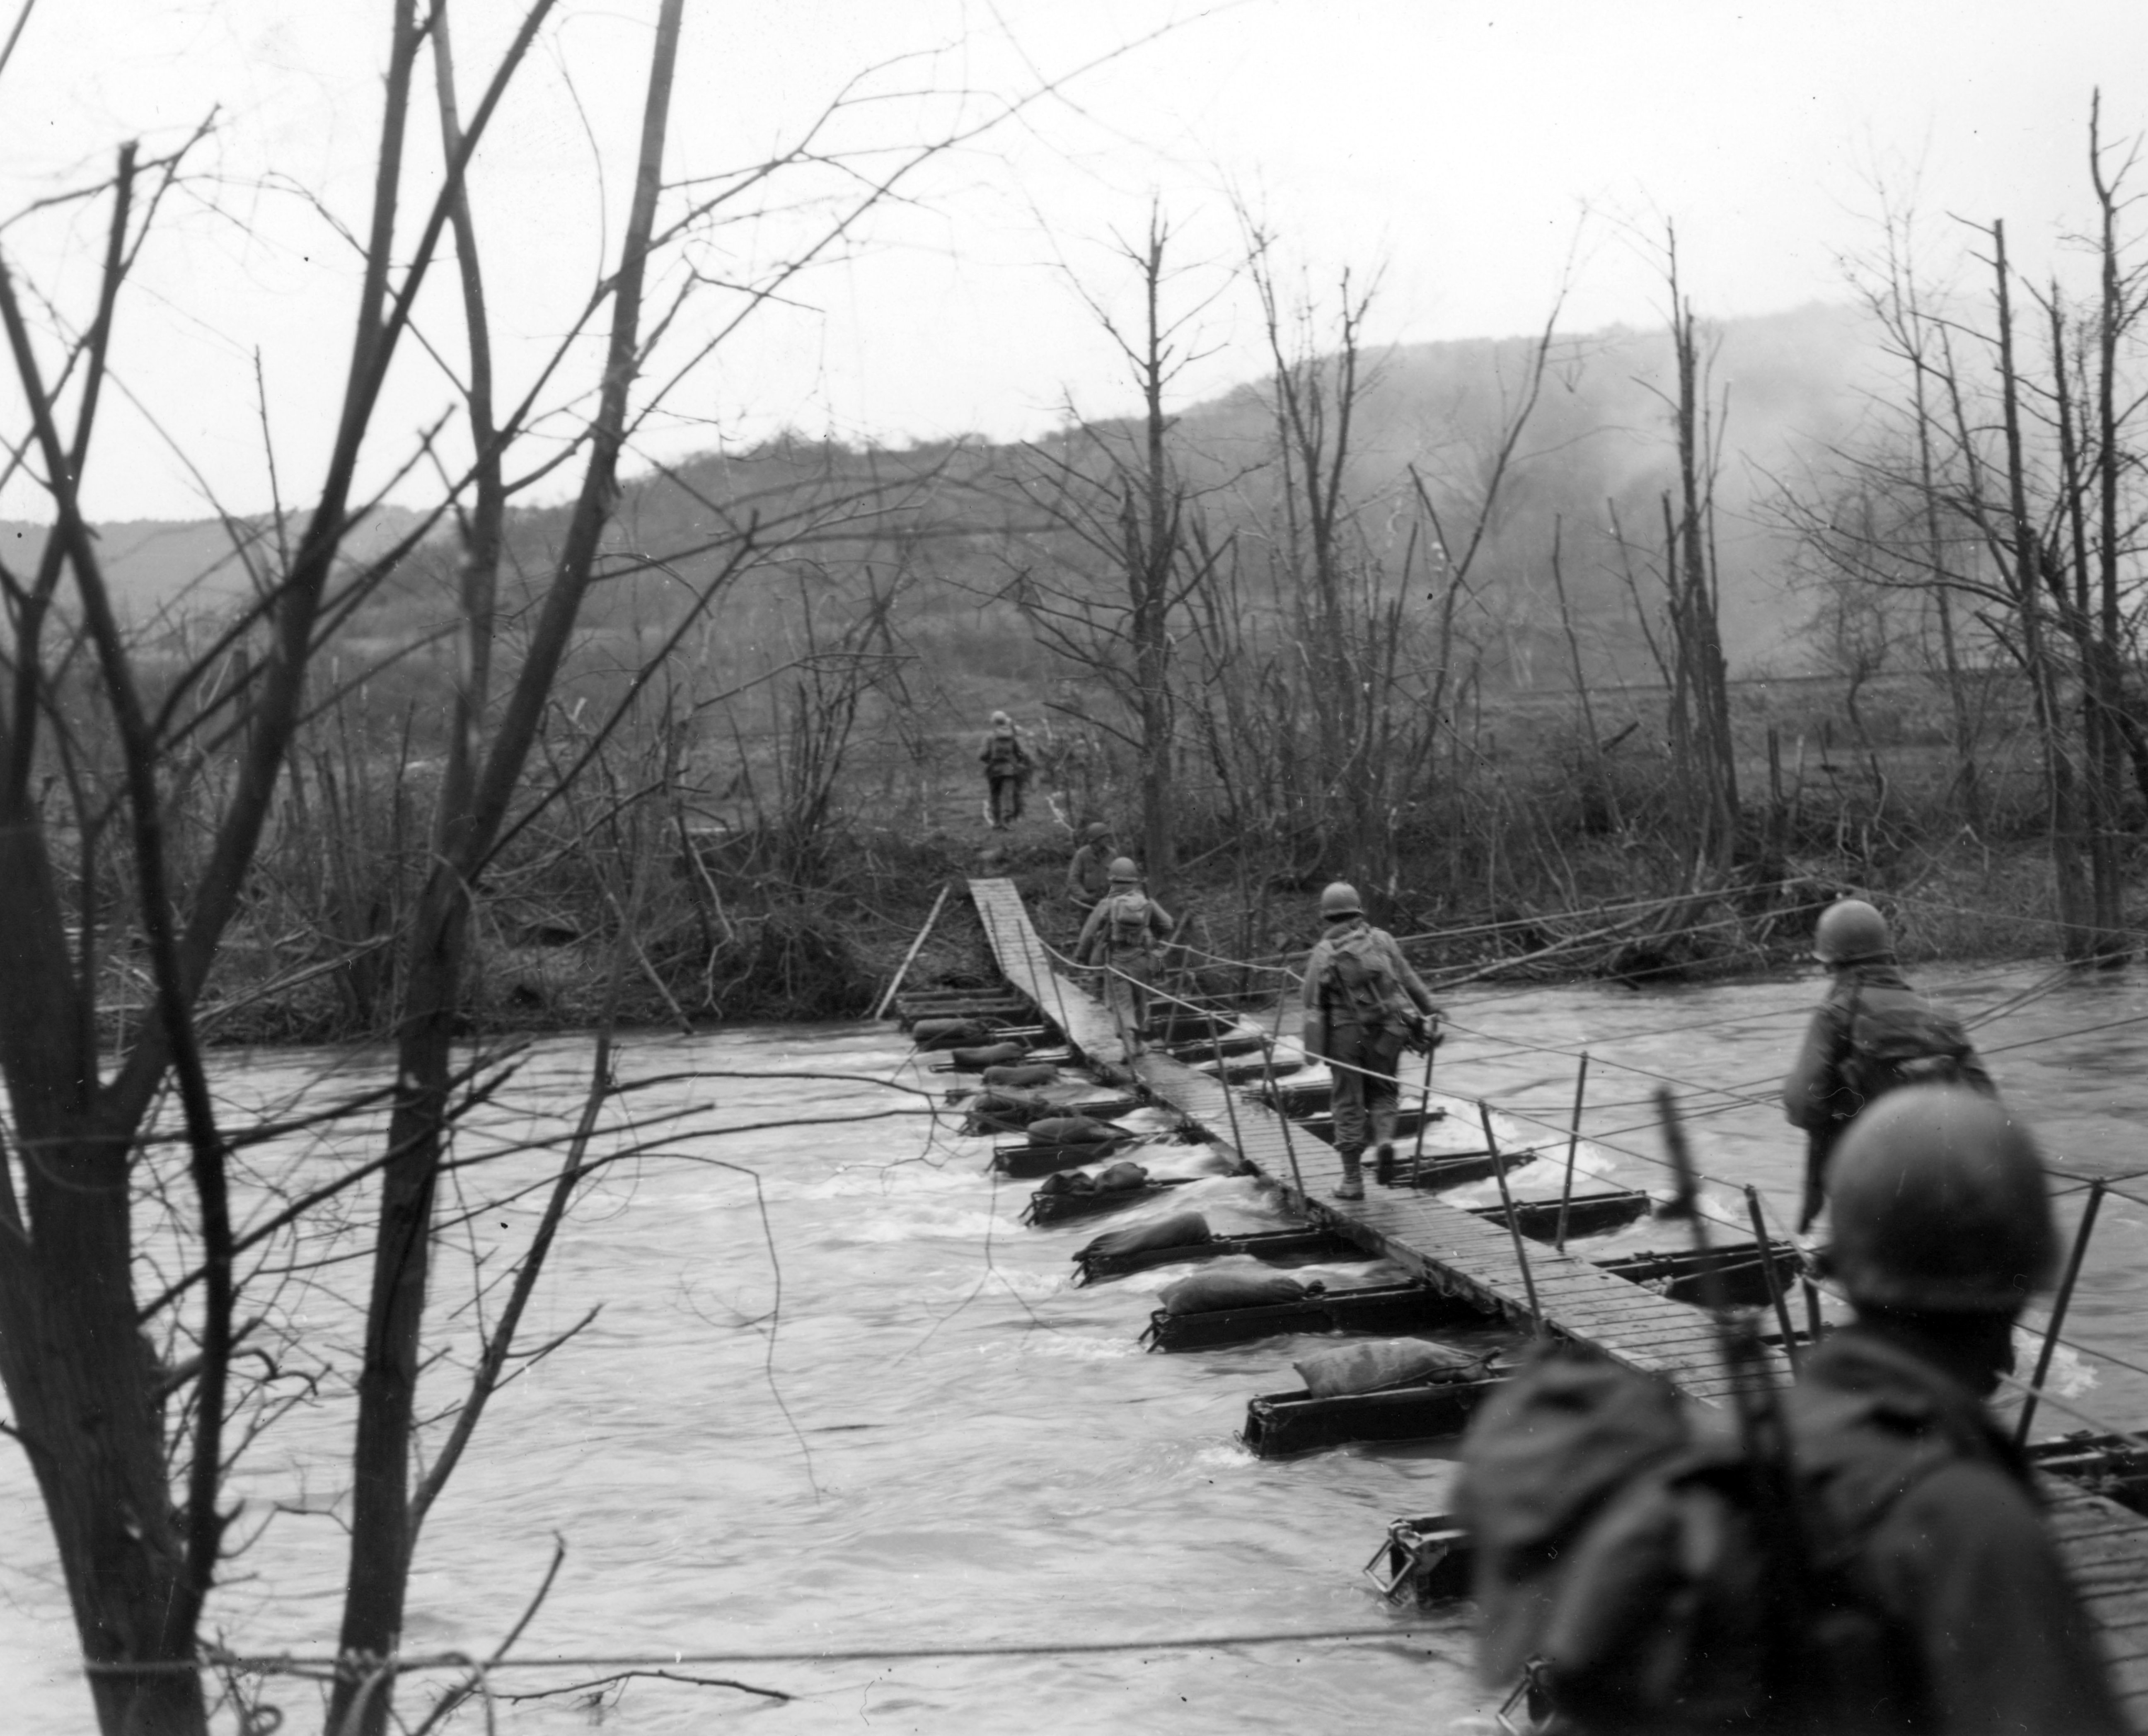 US soldiers crossing the Roer River